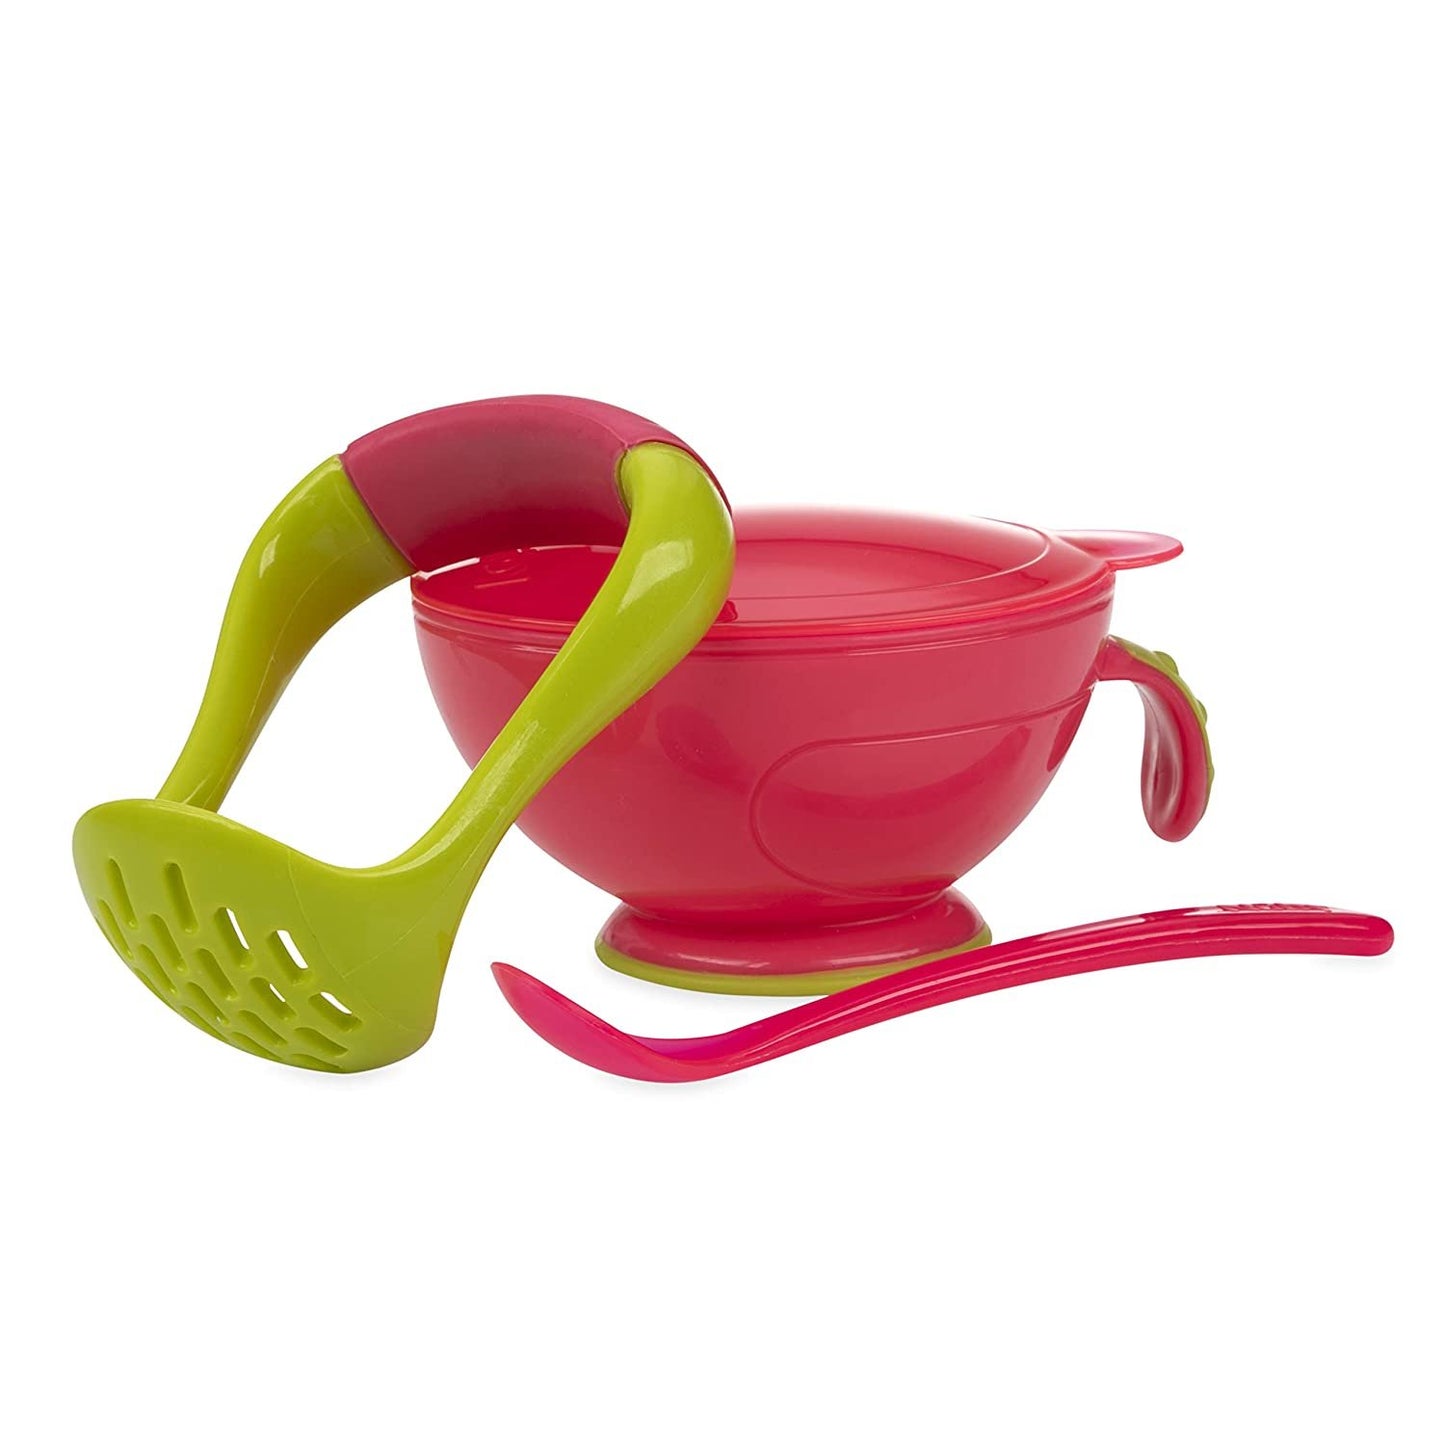 Nuby Garden Fresh Mash N' Feed Bowl with Spoon and Food Masher